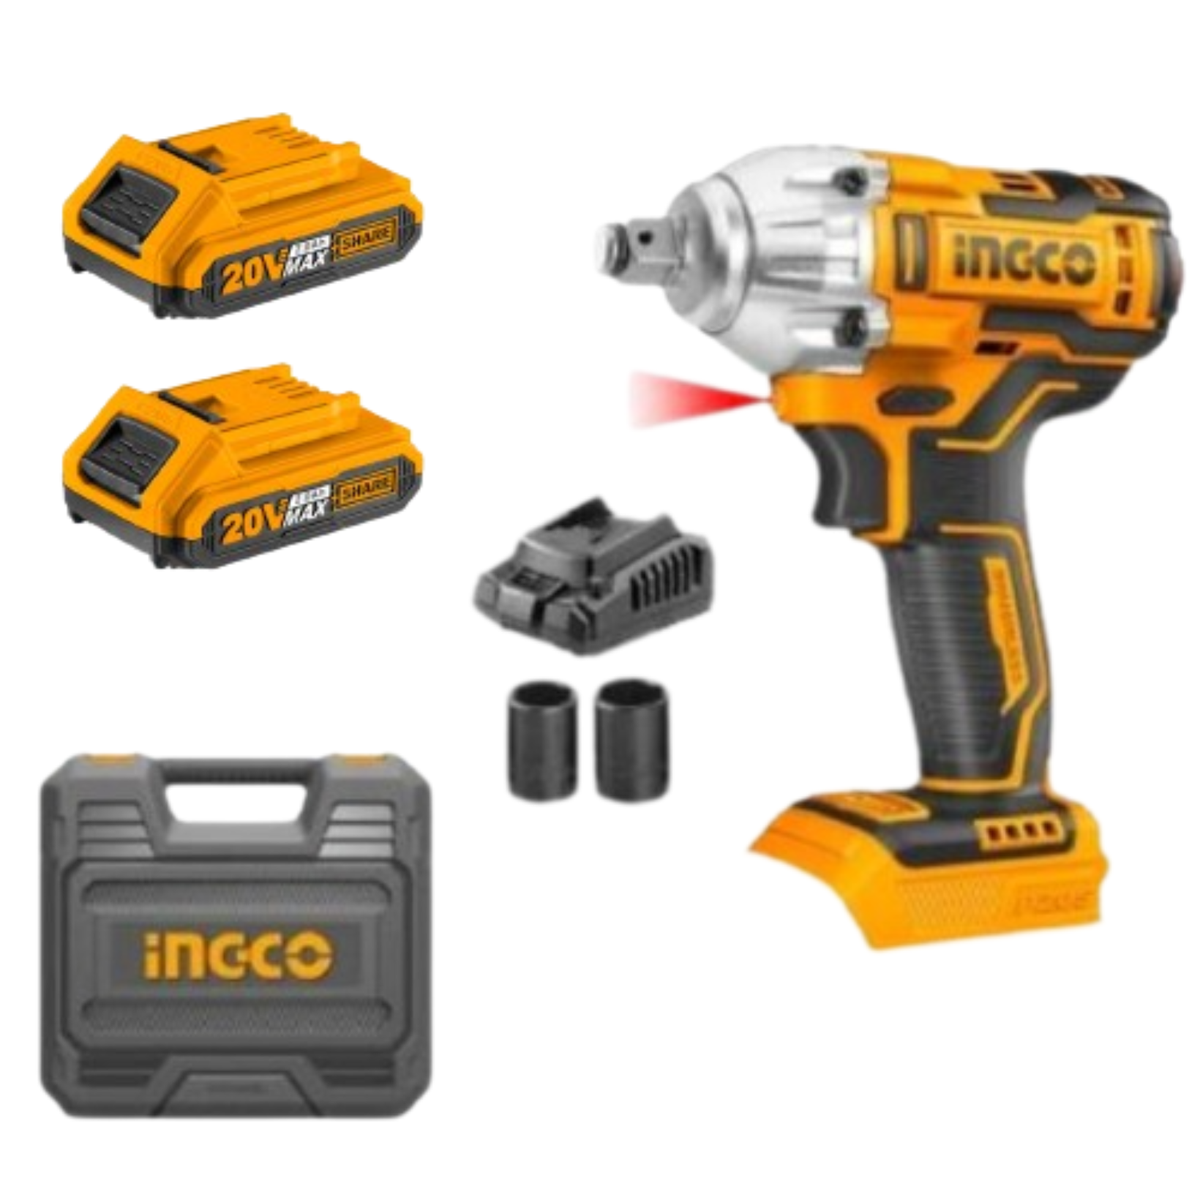 Ingco Cordless Impact Wrench 300NM 20V in Carry Case